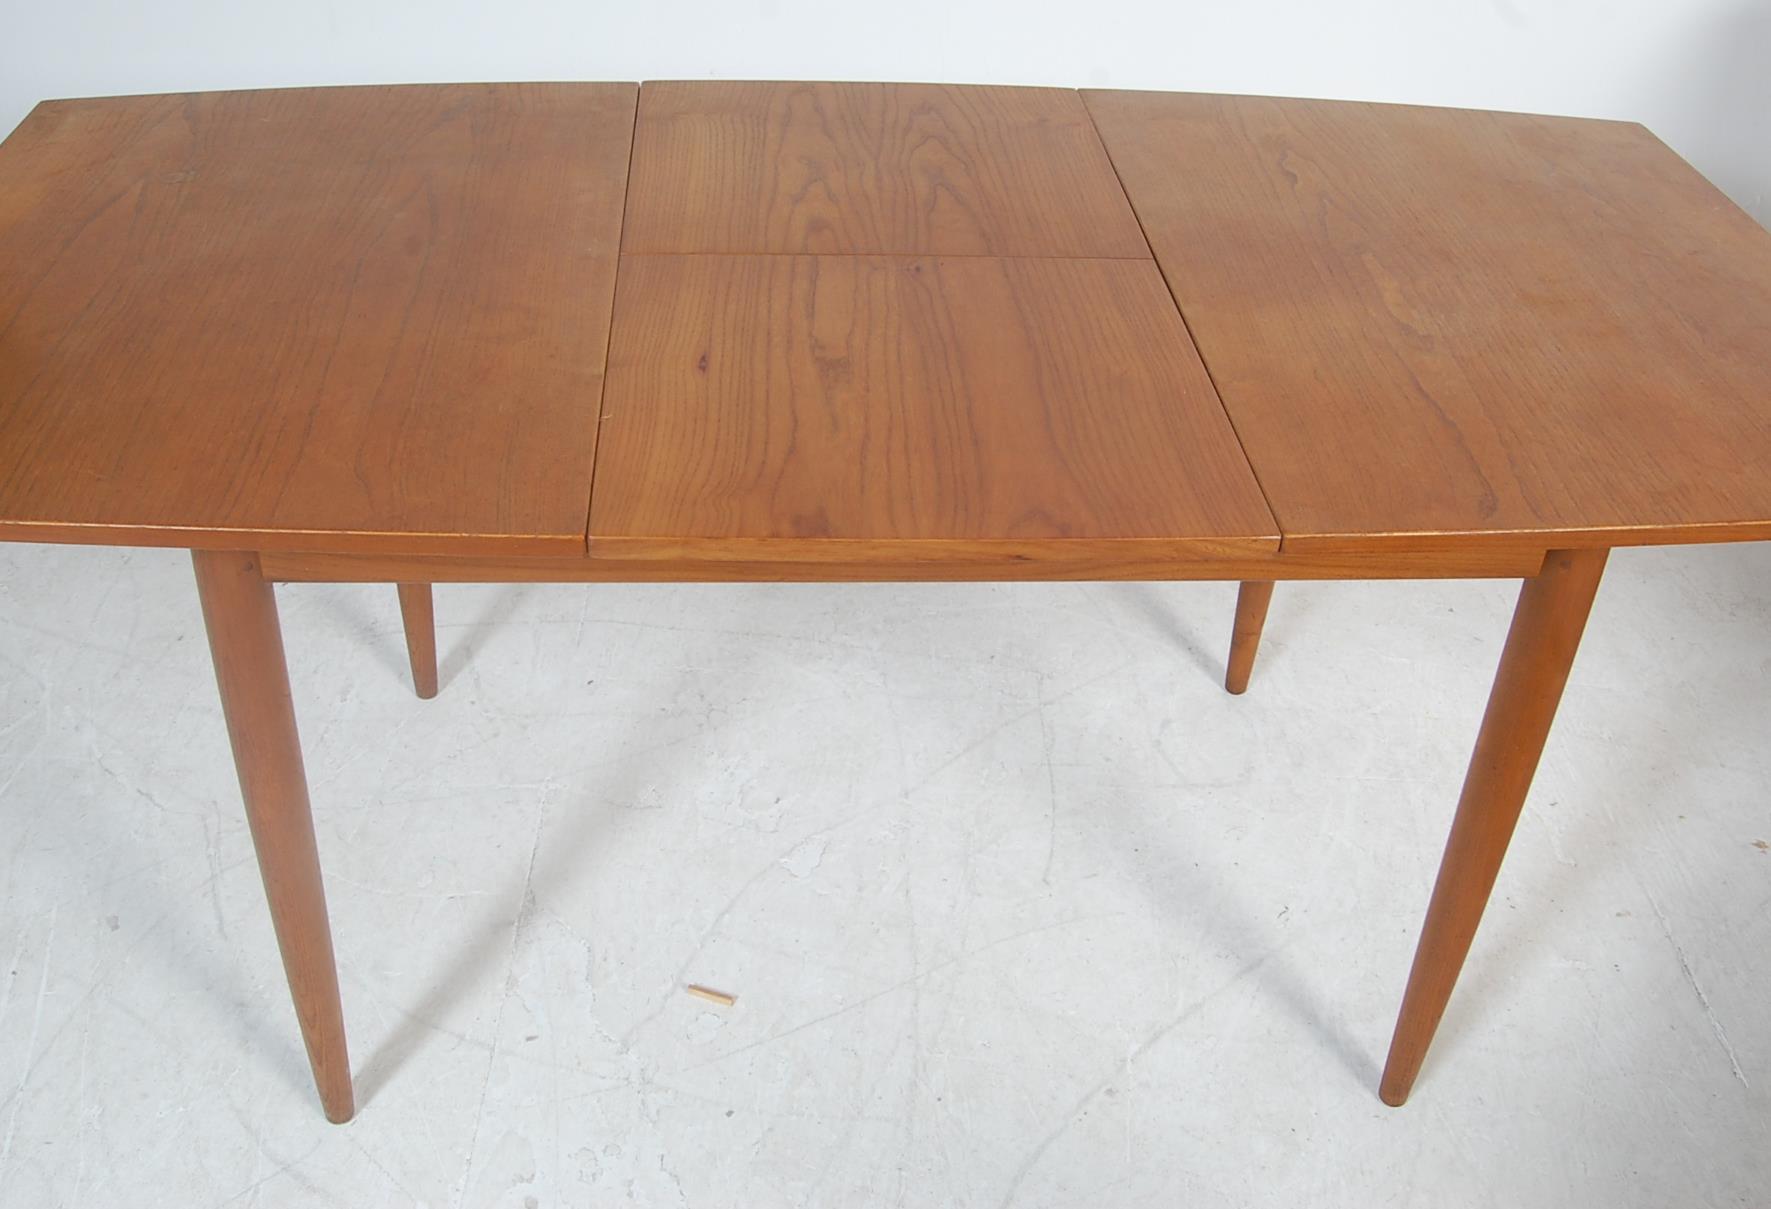 VINTAGE RETRO 1960’S TEAK WOOD SCANDART EXTENDING DINING TABLE AND CHAIRS - Image 7 of 8